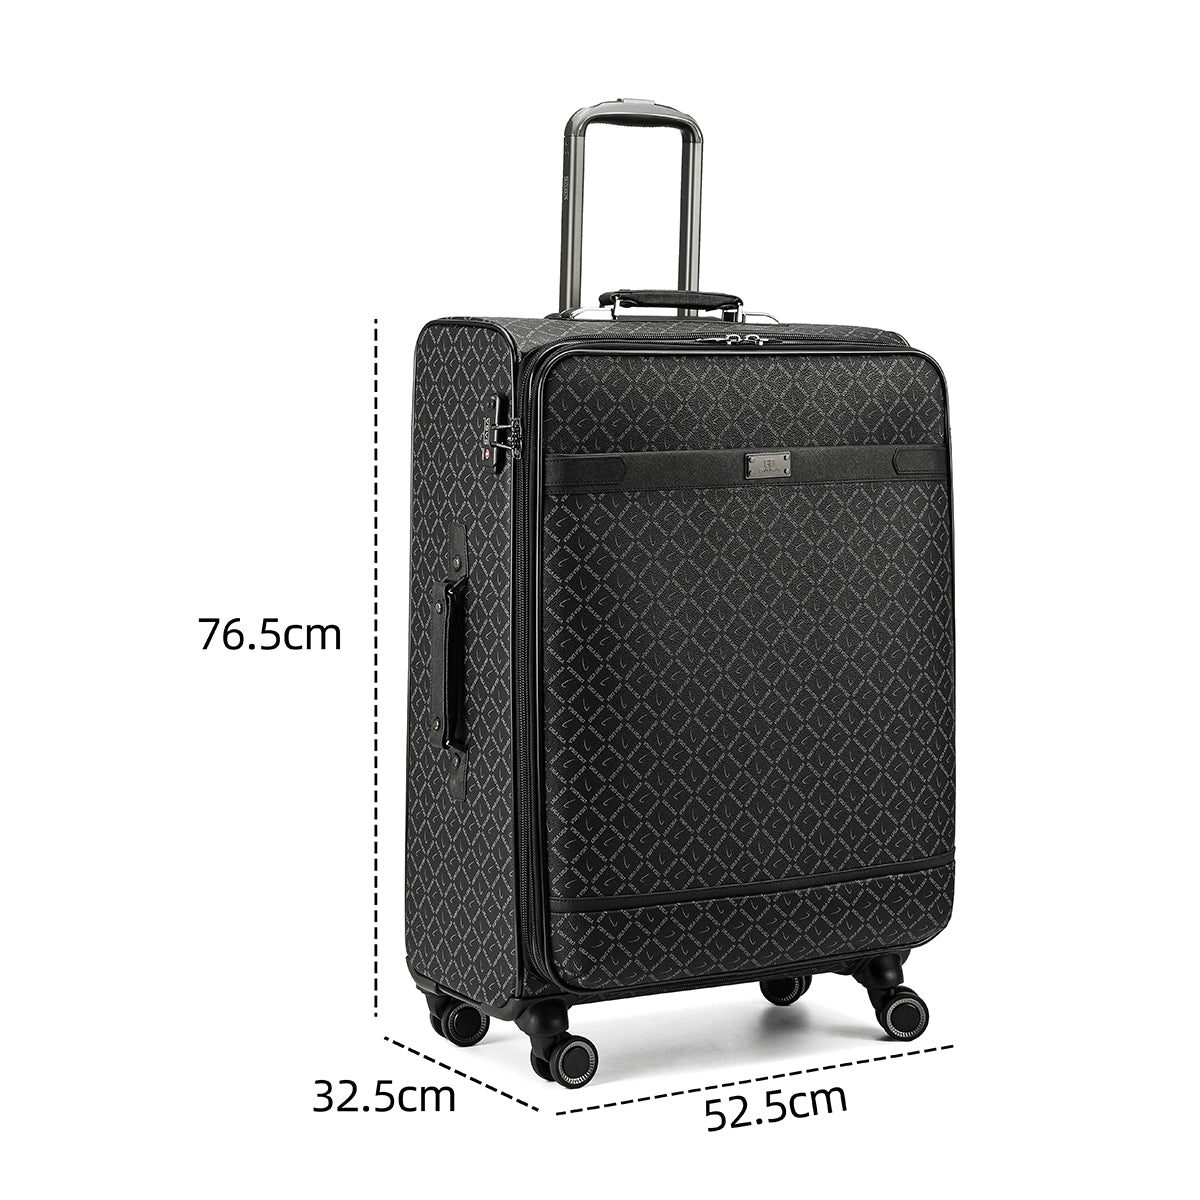 Luxurious travel bag in several sizes, gray color